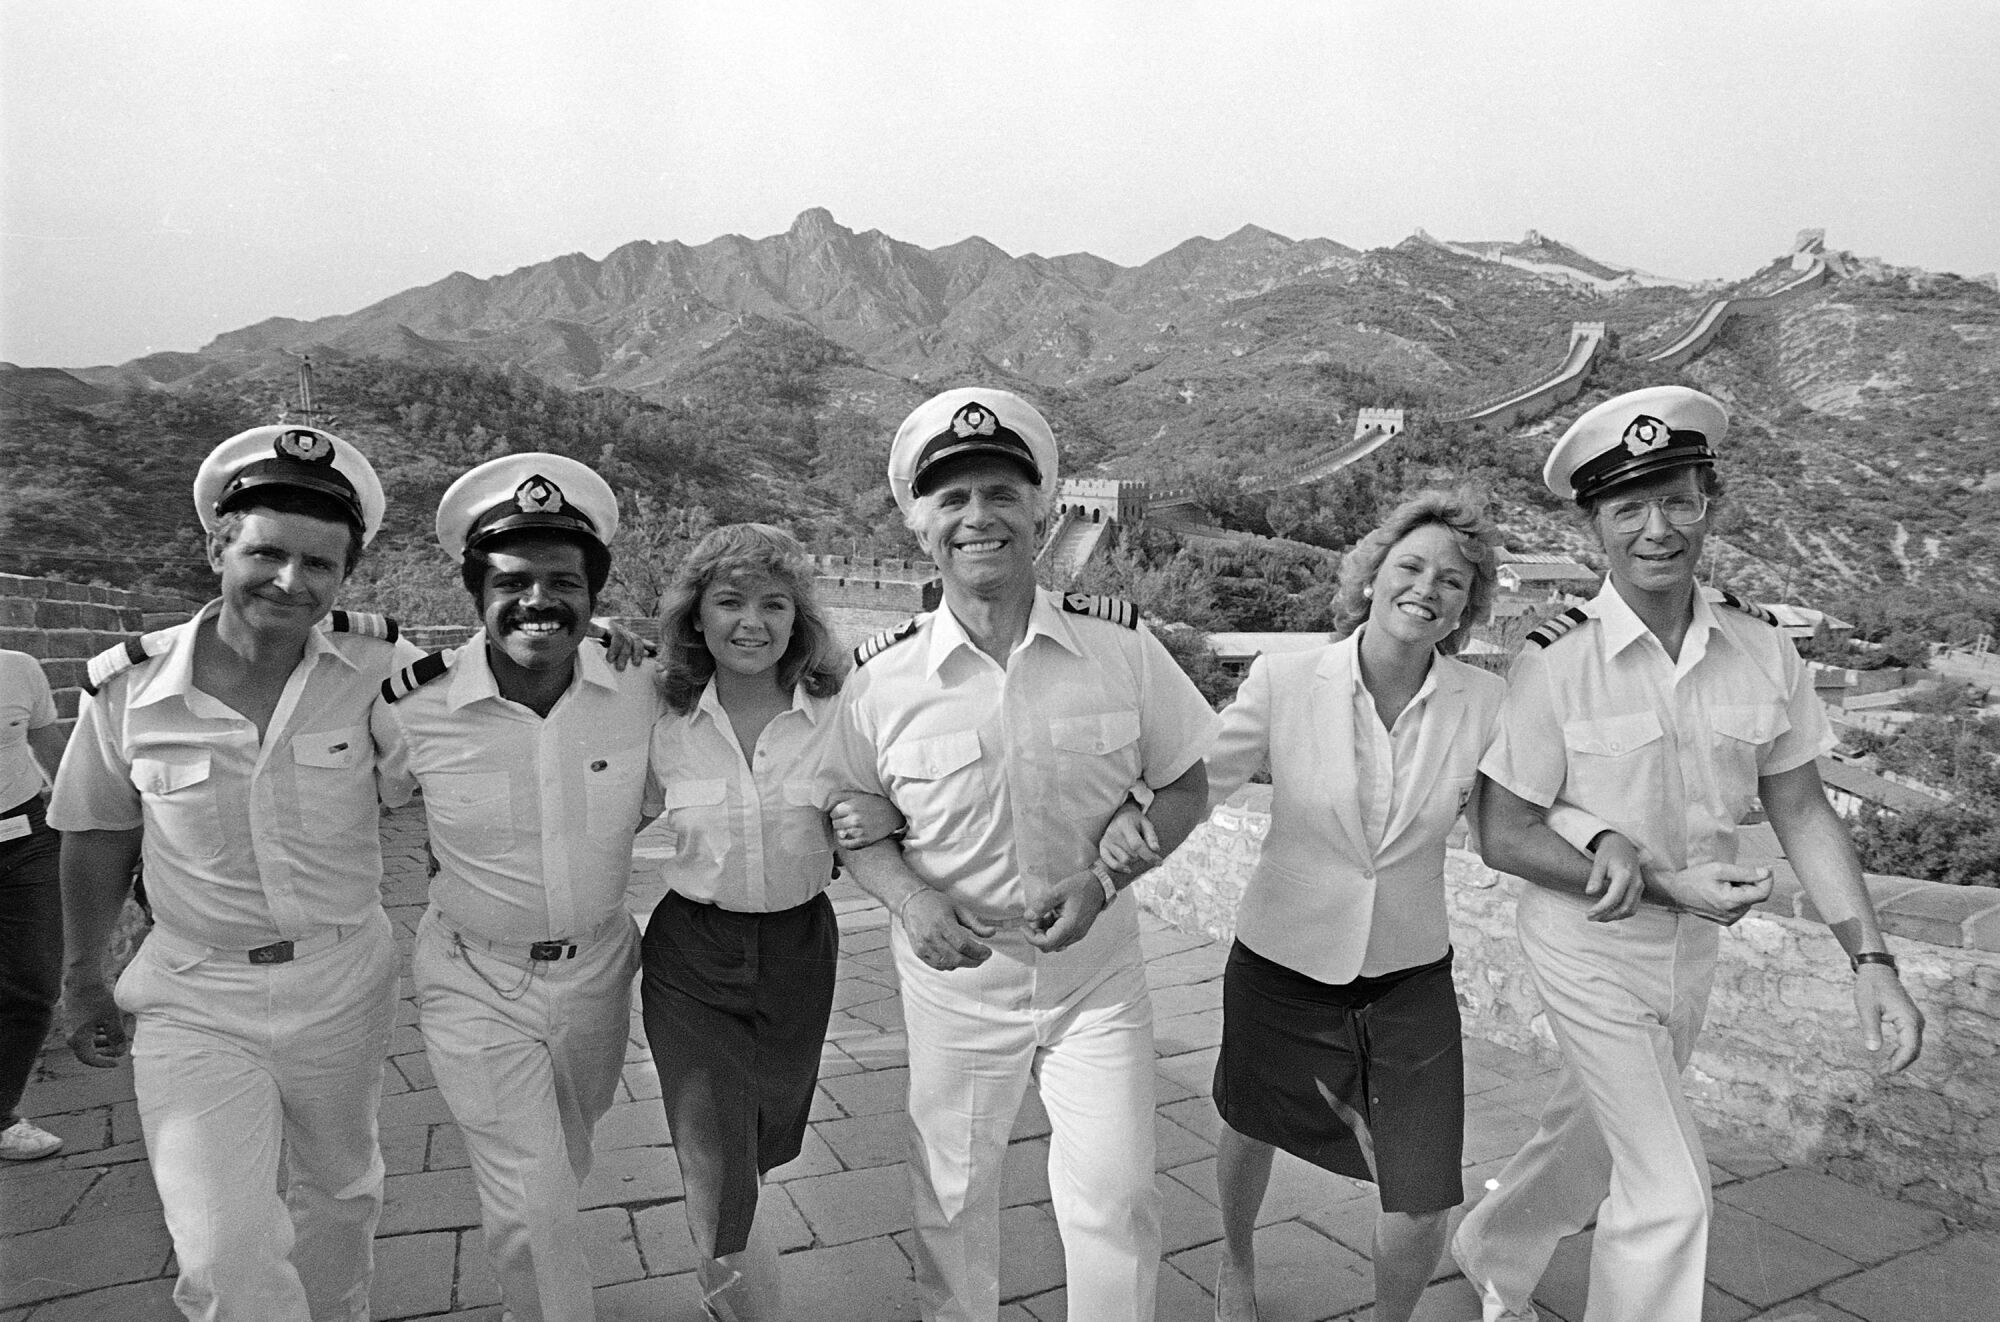 The cast of "The Love Boat" at the Great Wall of China